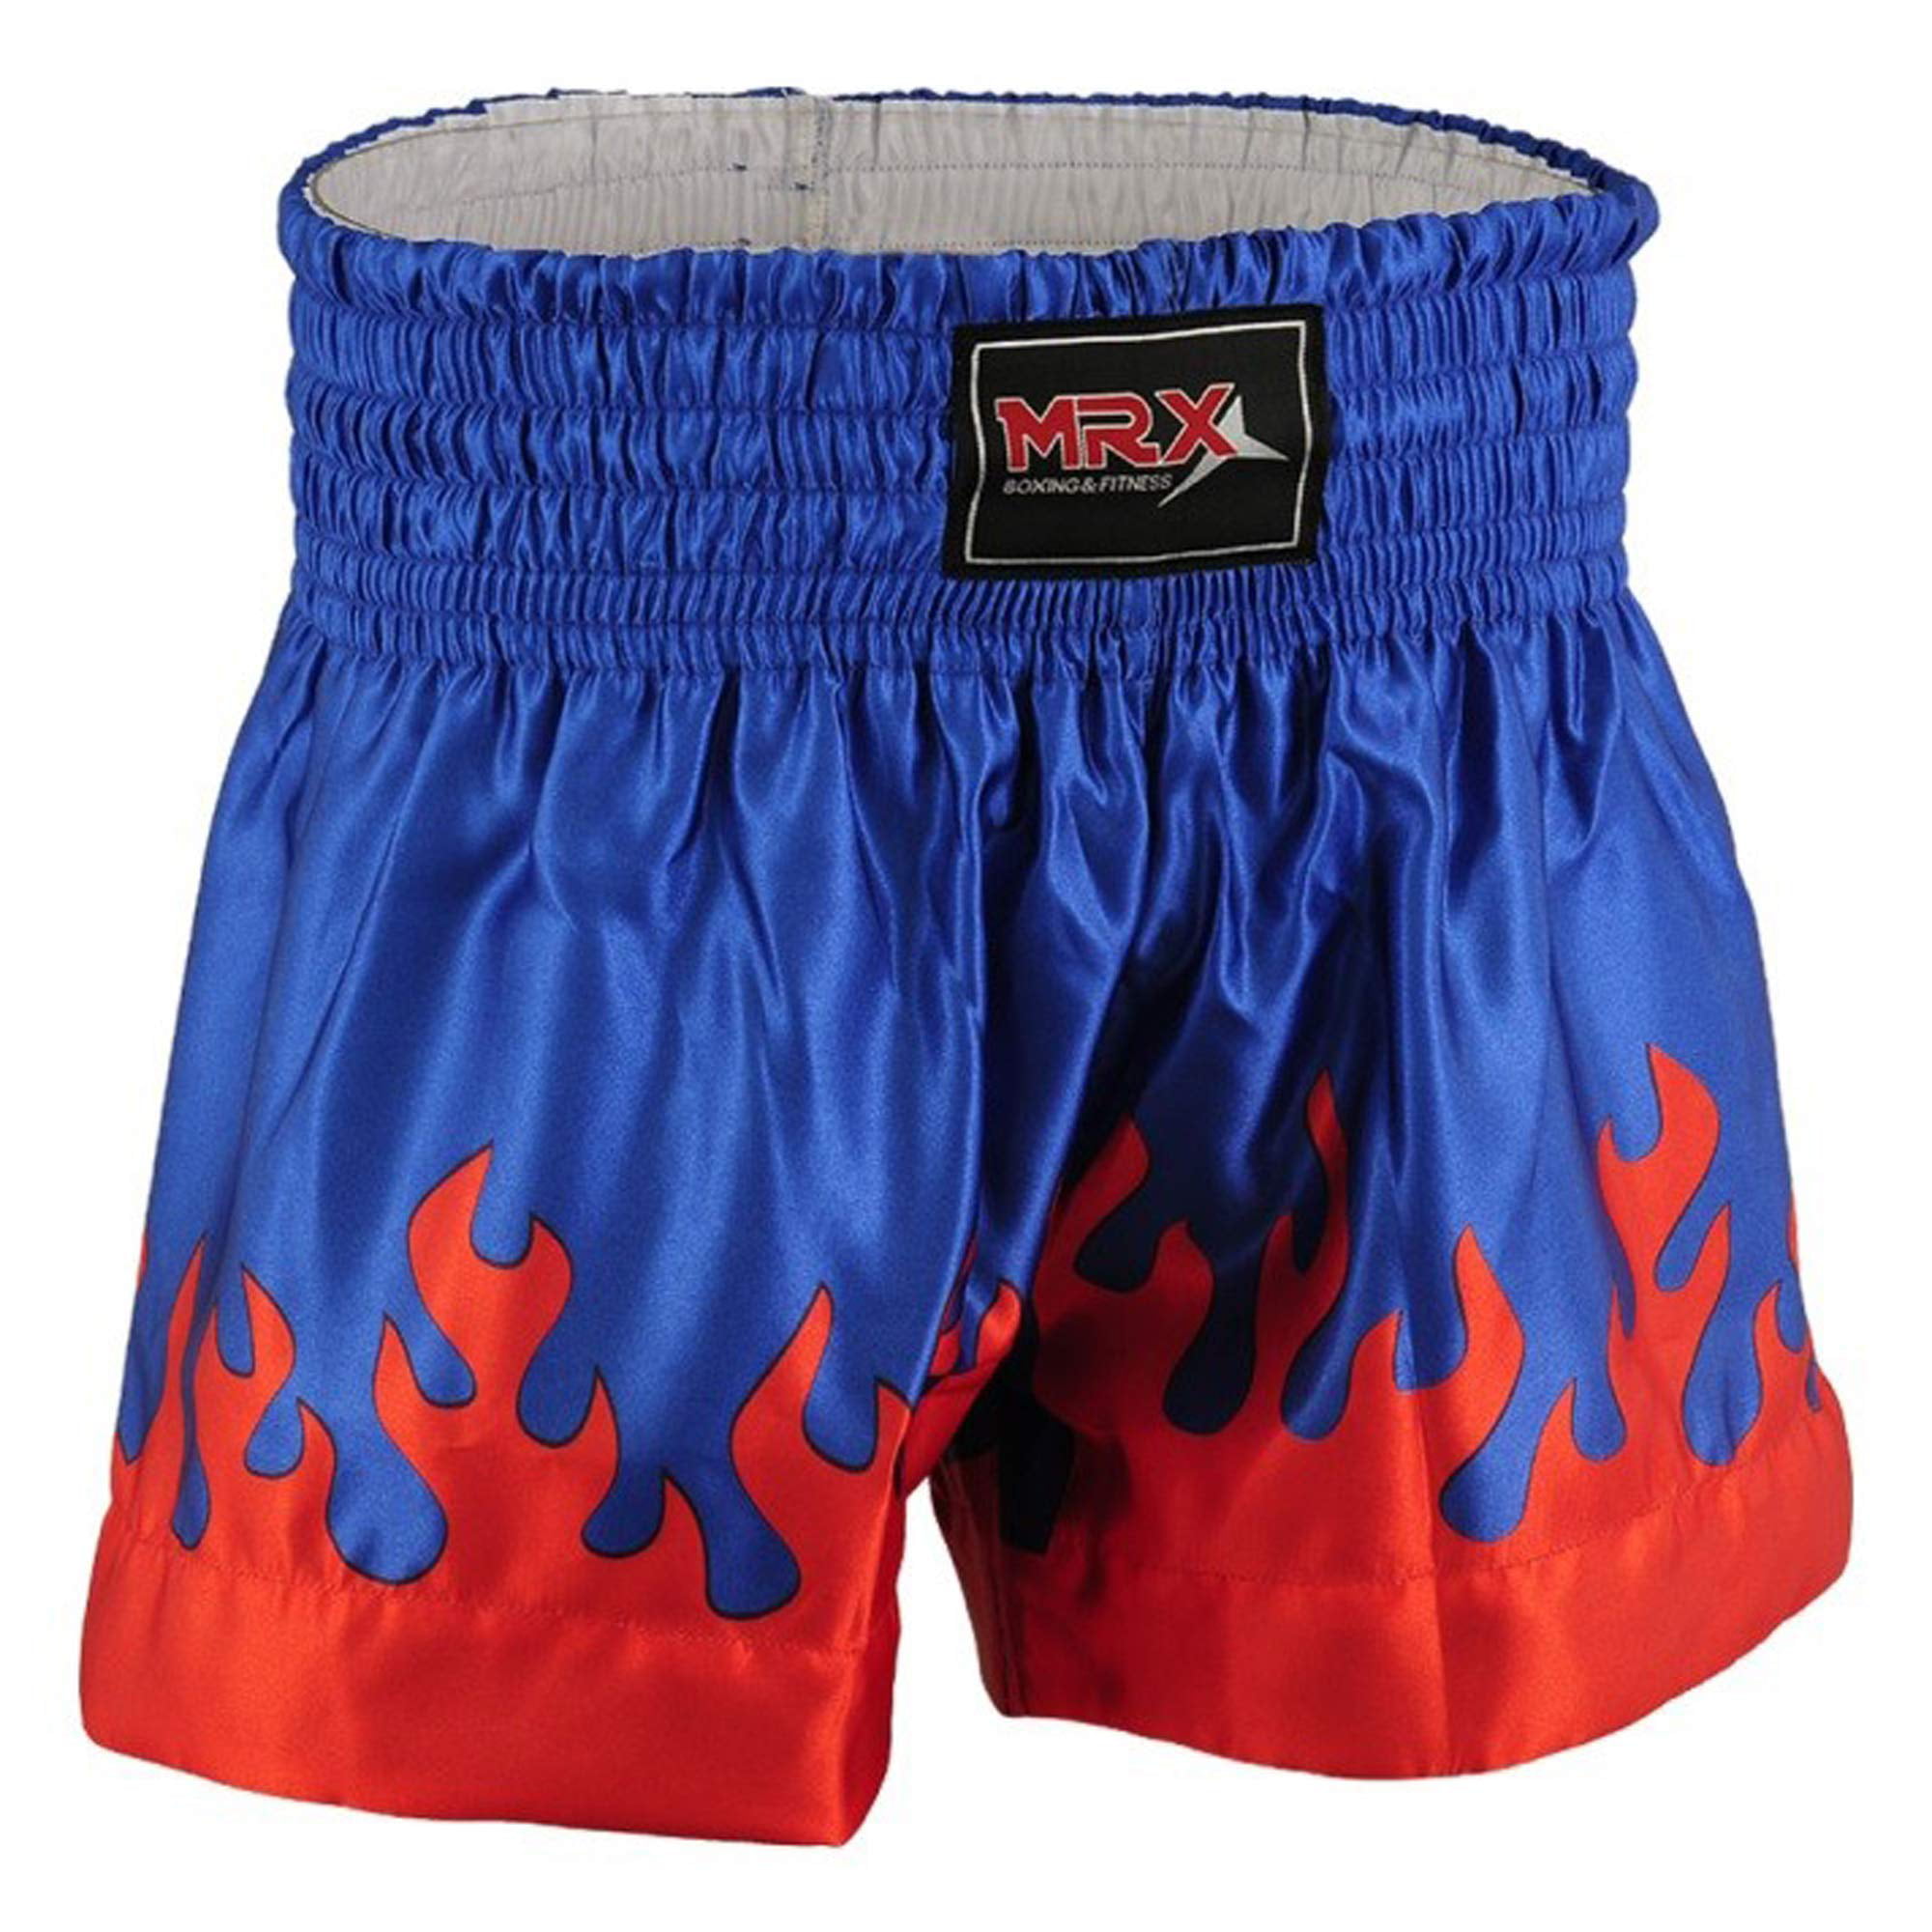 Kids - Adults LITE PINK SHORTS TRUNKS FOR MUAY THAI SPORTS TRAINING 